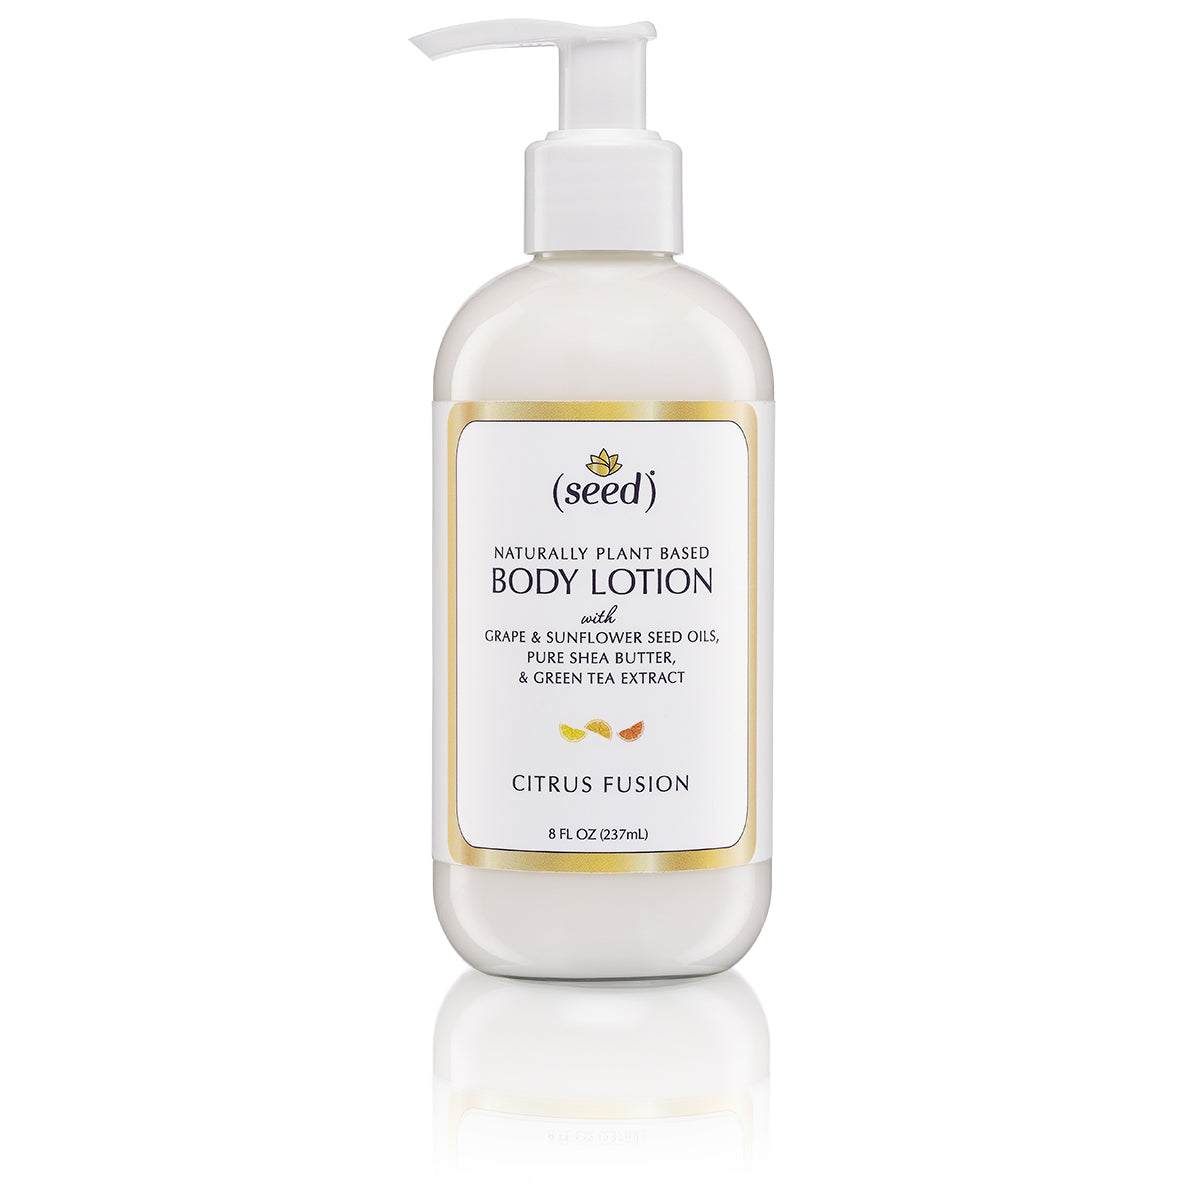 Seed Citrus Fusion Body Lotion with Grape and Sunflower Seed Oils, Shea Butter and Green Tea Extract, Orange, Grapefruit and Lemon Essential Oils